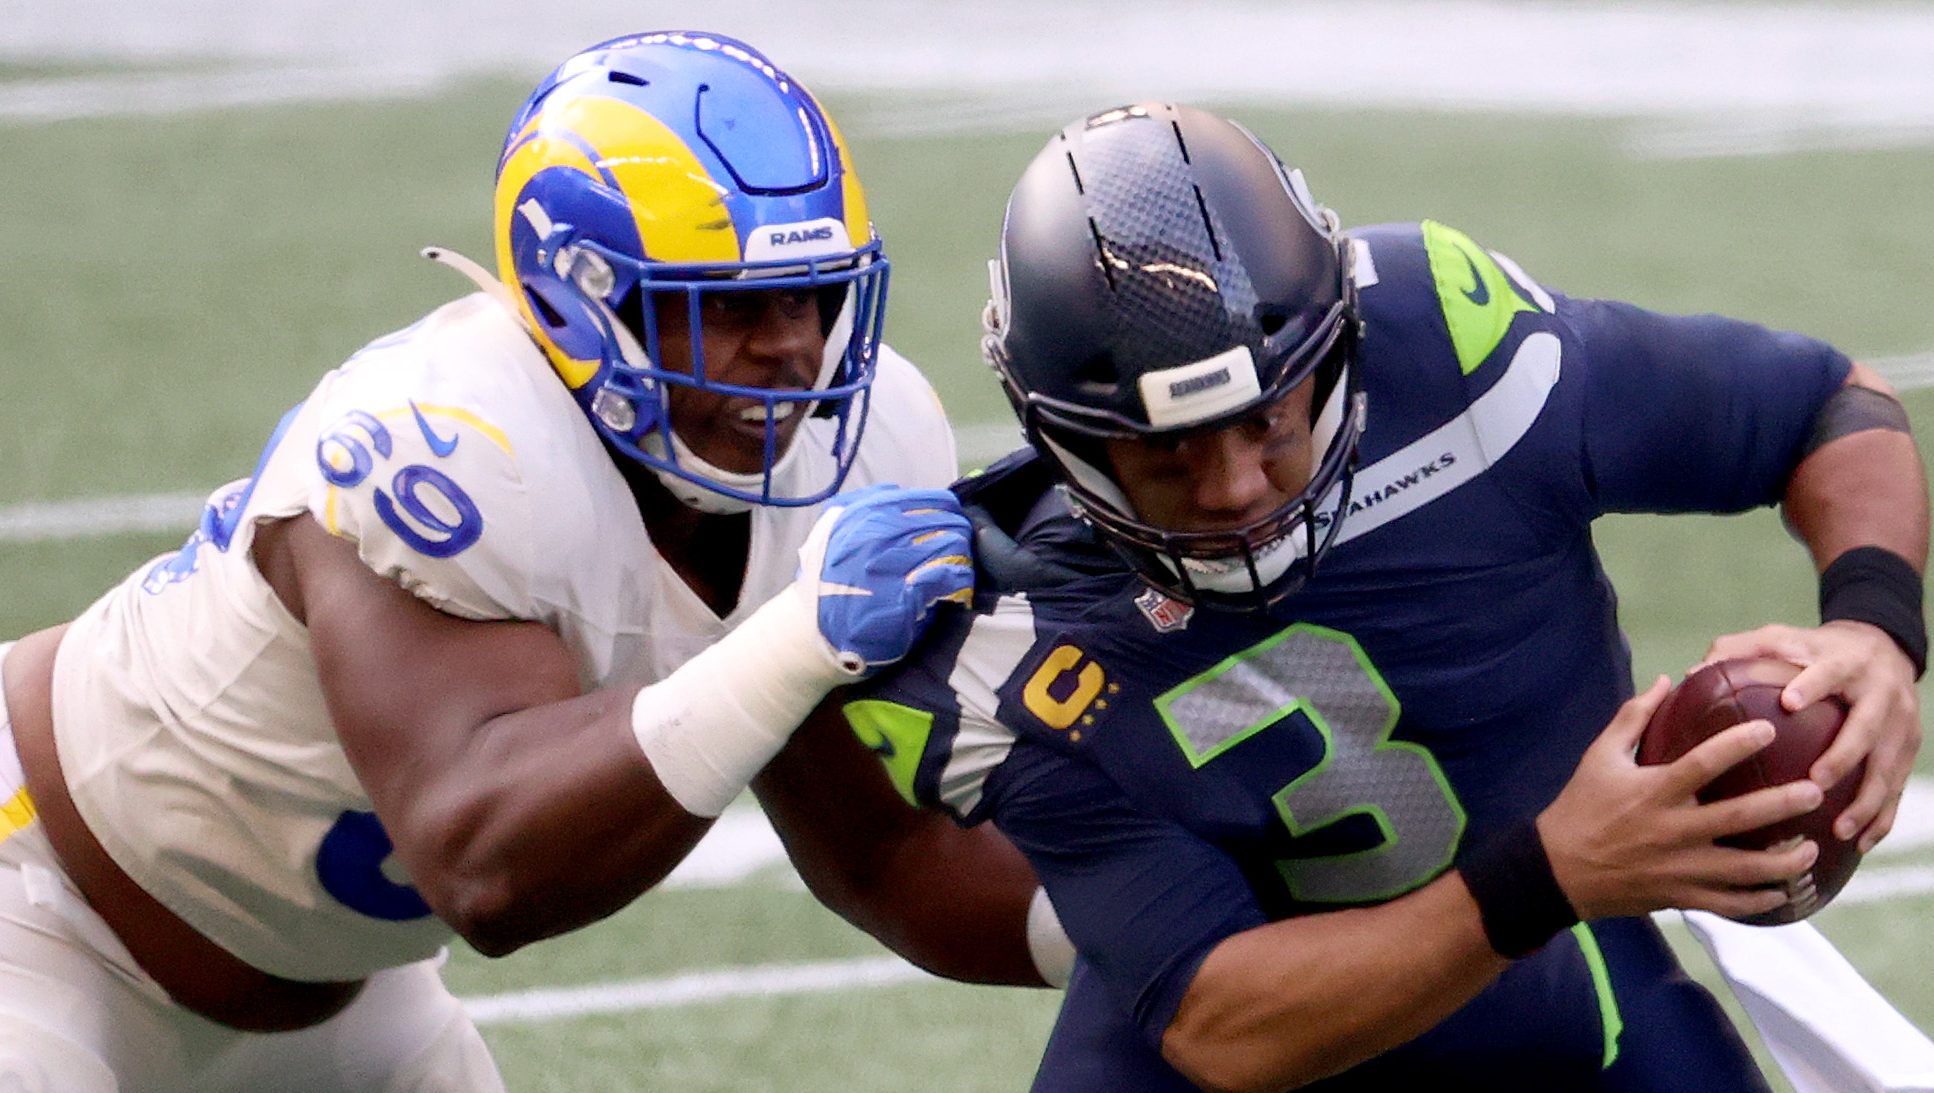 Rams to wear new uniform combination for playoff game vs. Seahawks